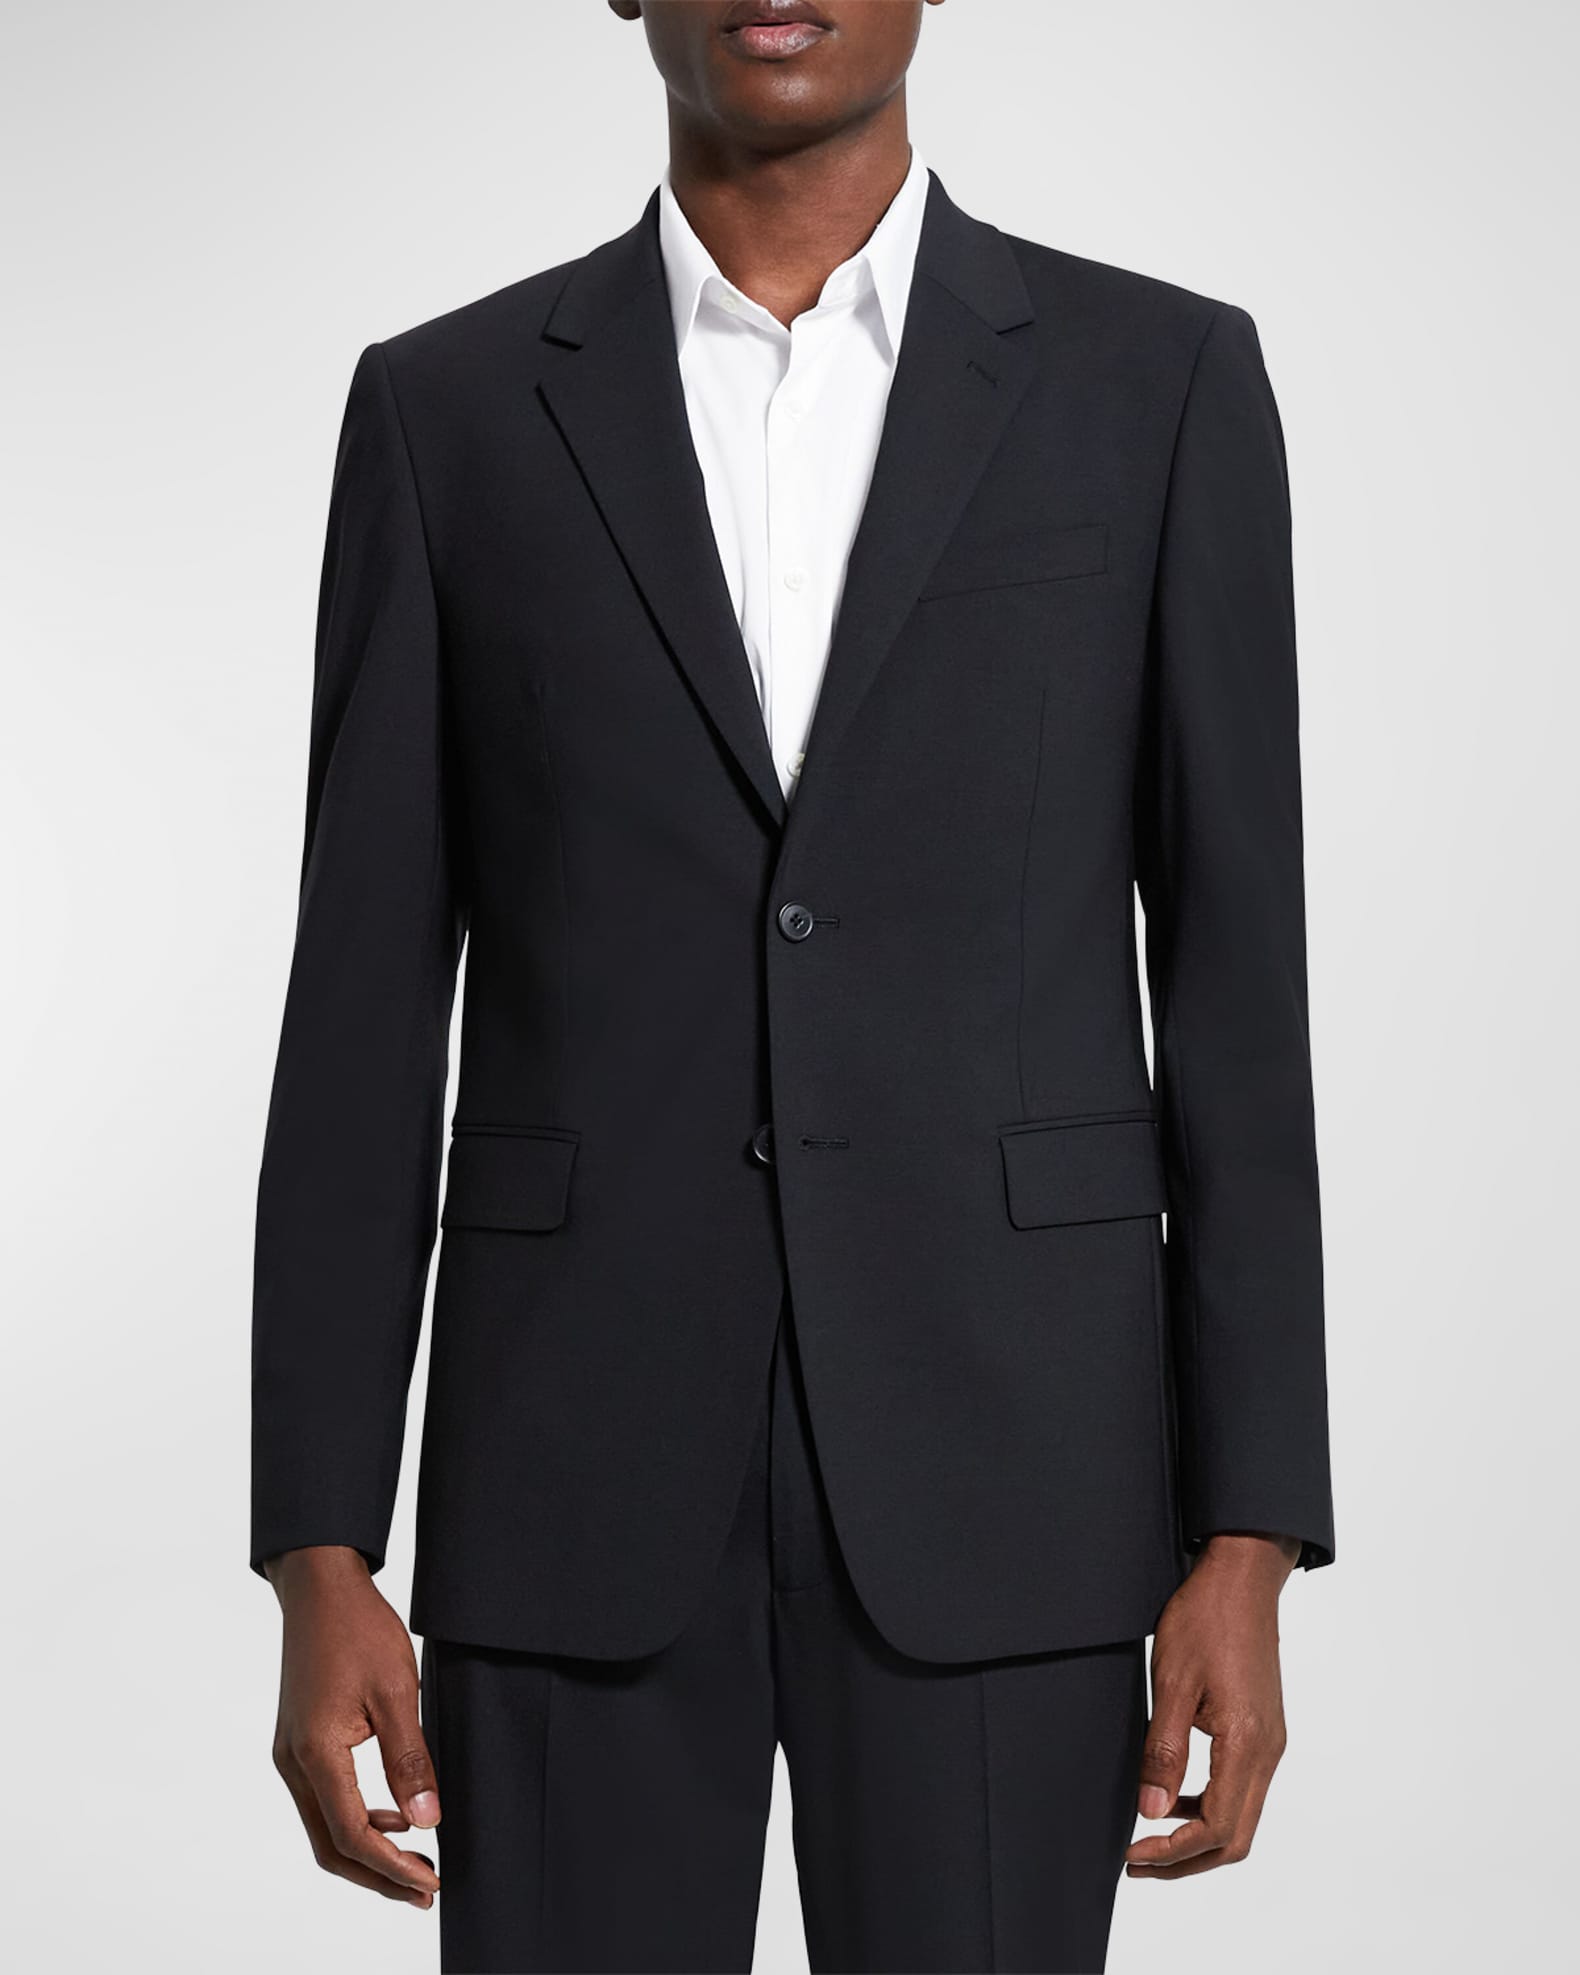 Theory Men's Chambers in New Tailor | Neiman Marcus